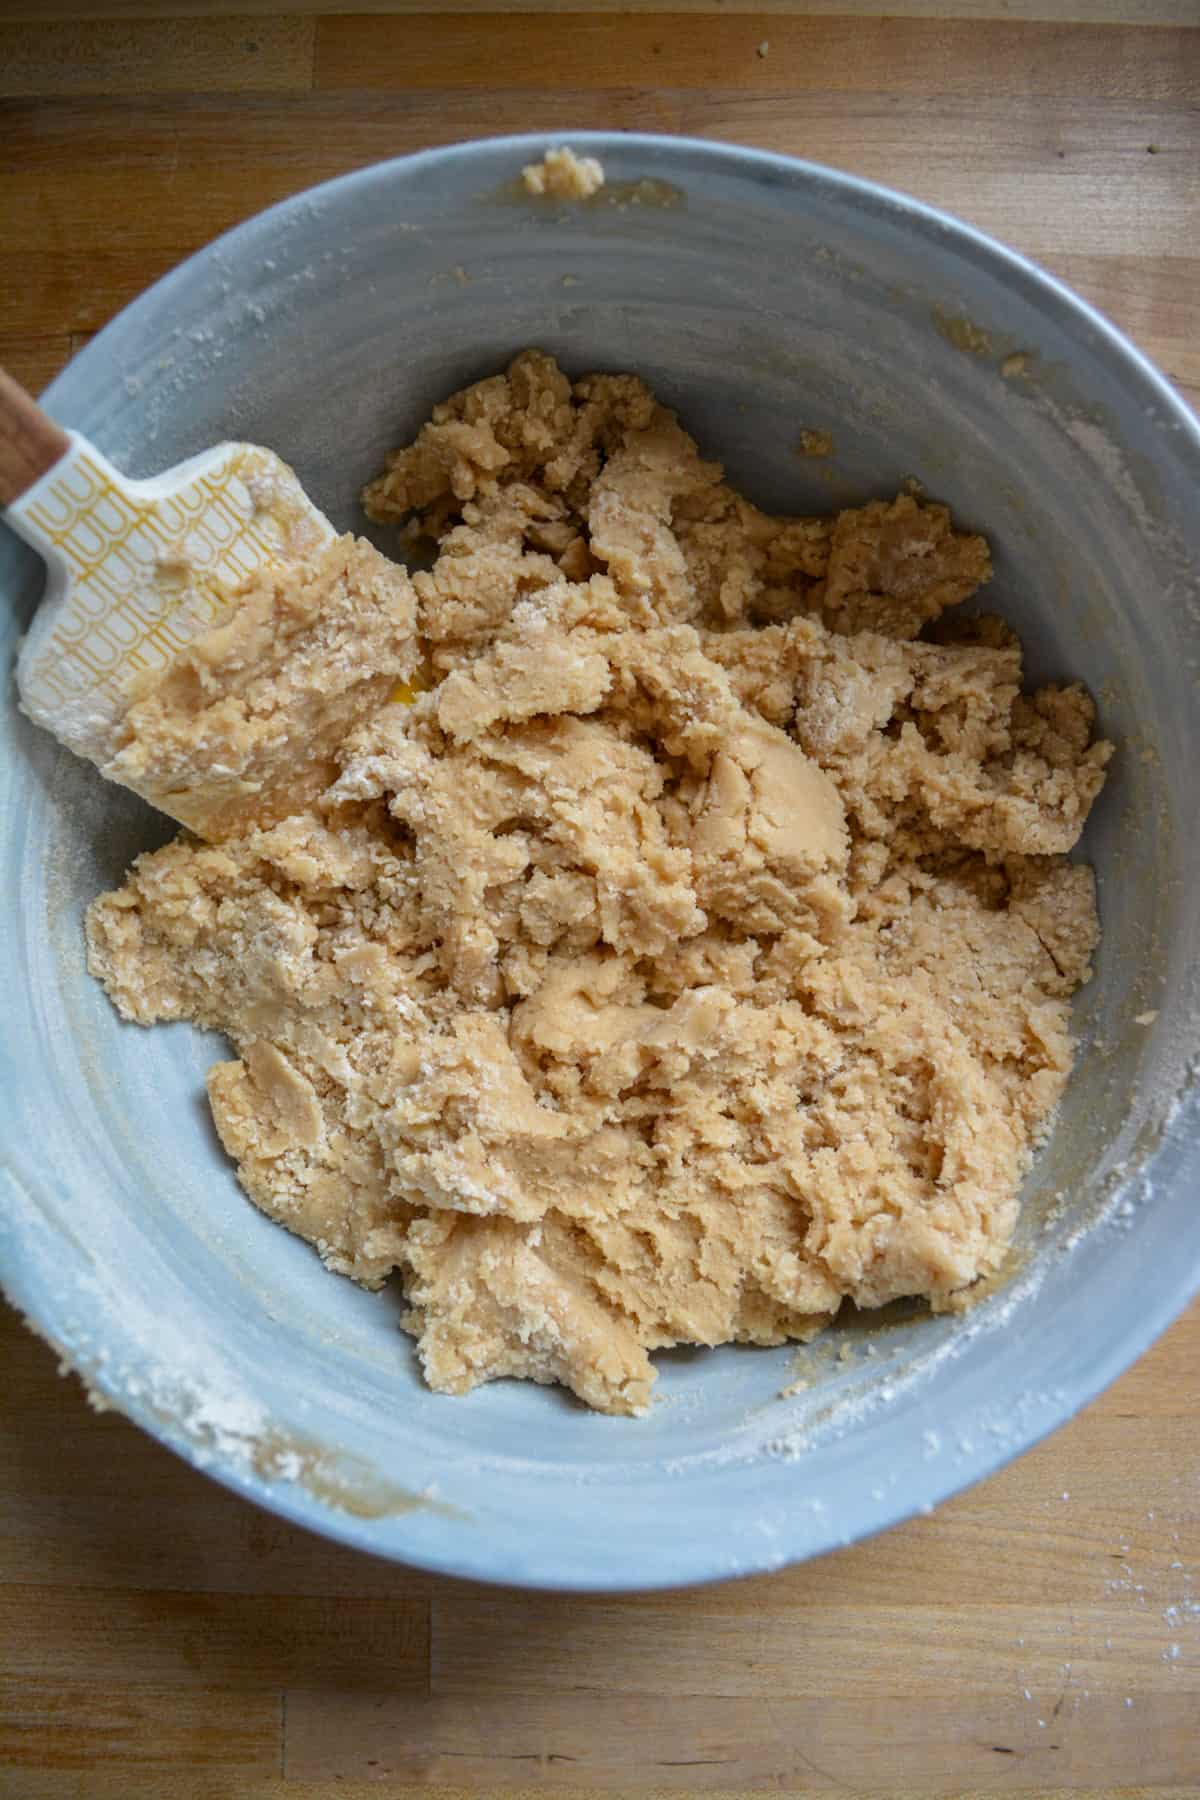 Dry ingredients added into the bowl to make the cookie dough.